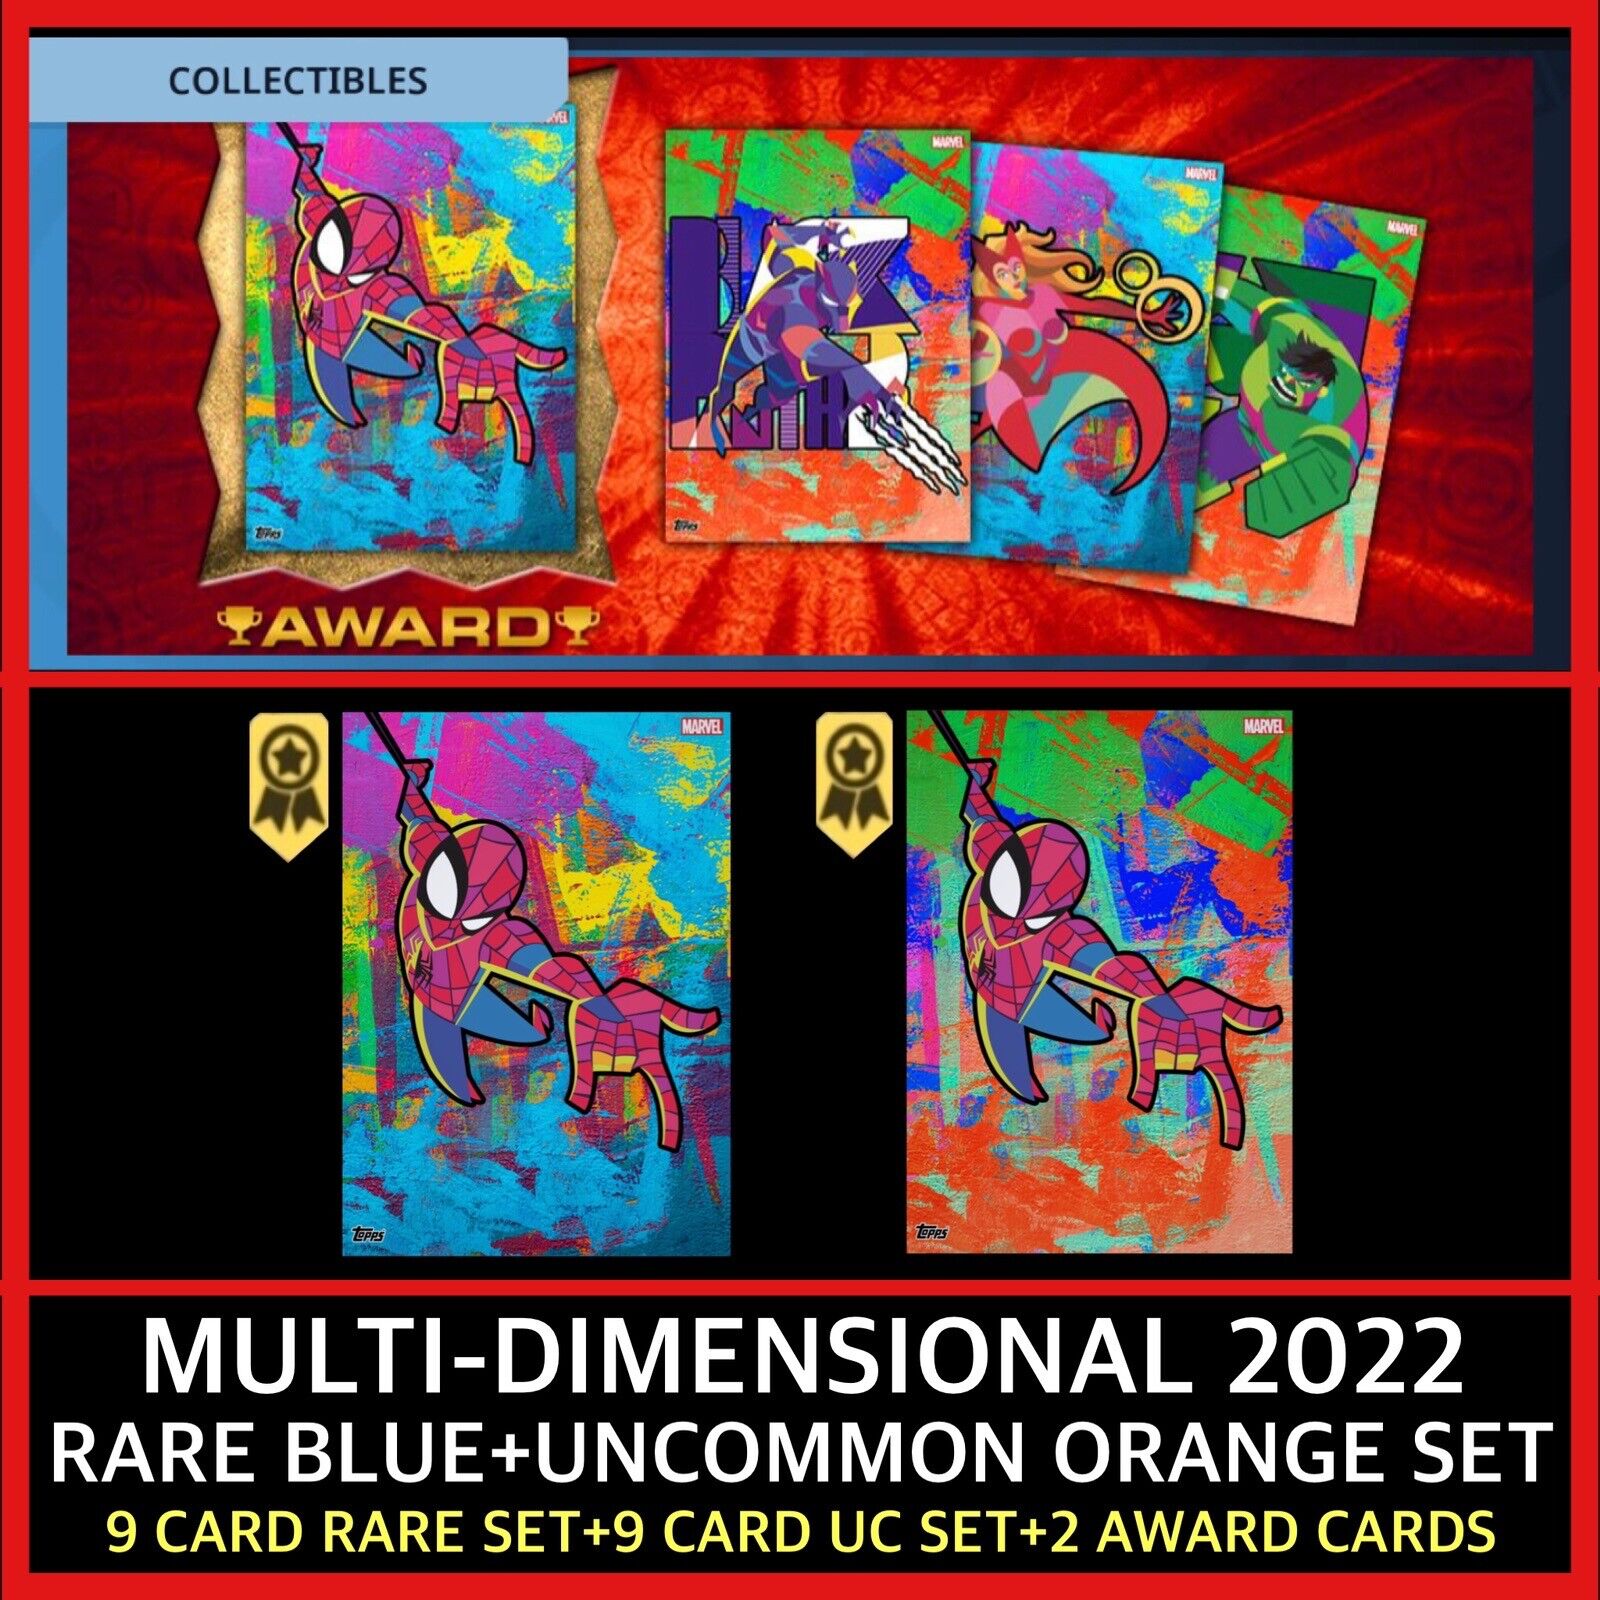 MULTI-DIMENSIONAL 2022-RARE+UC 18 CARD SET+AWARD-TOPPS MARVEL COLLECT